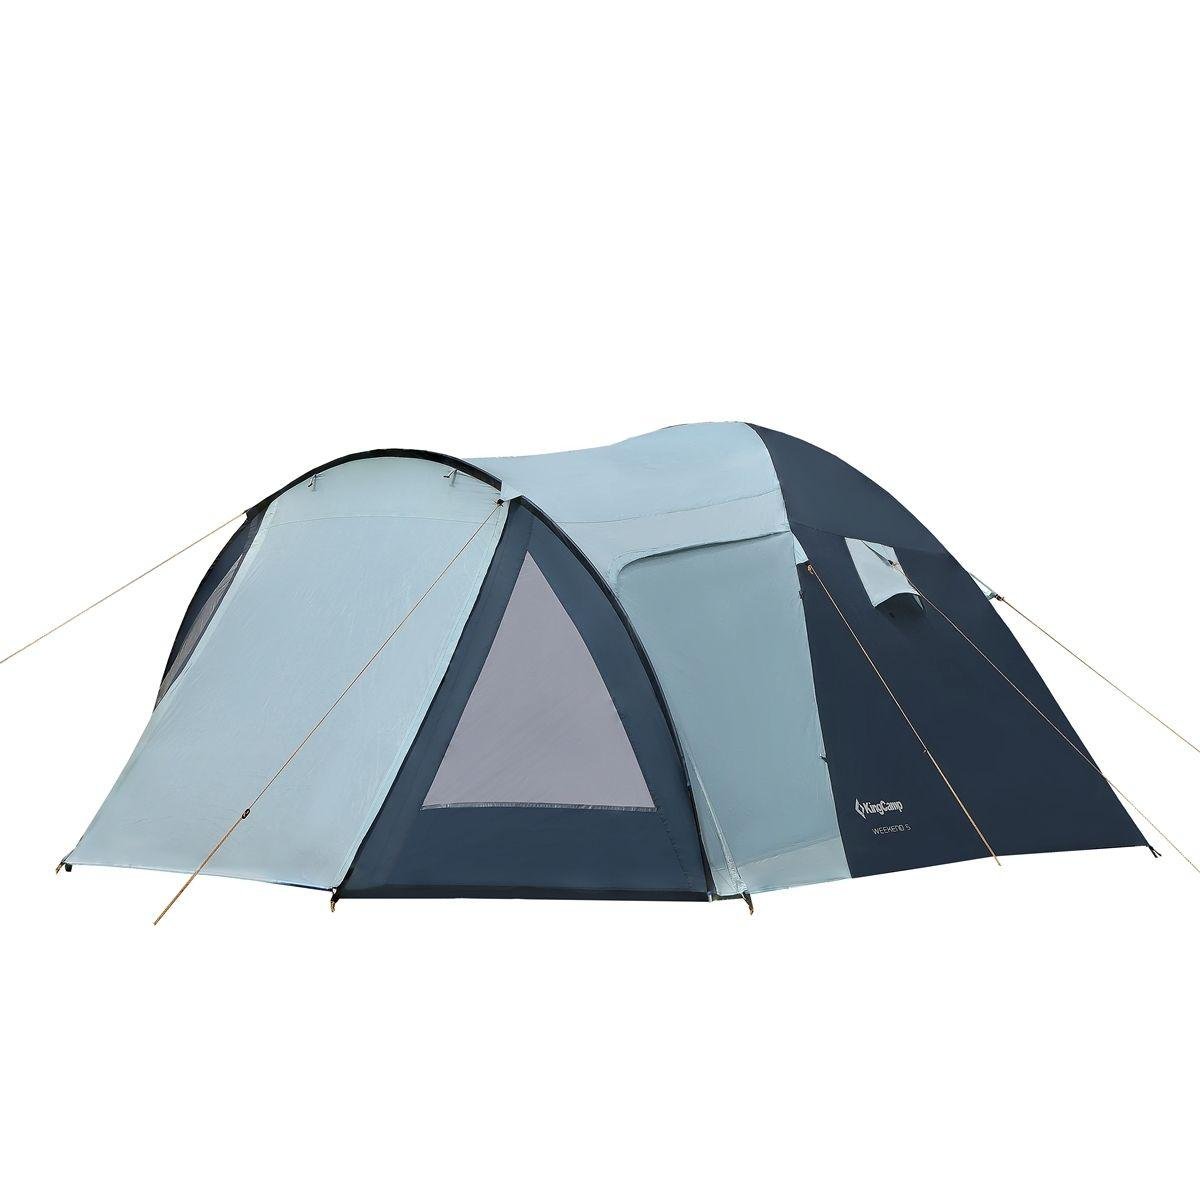 KingCamp Outdoor Tent Family Group Camping 5Person 3 Season Double Layer tents 3